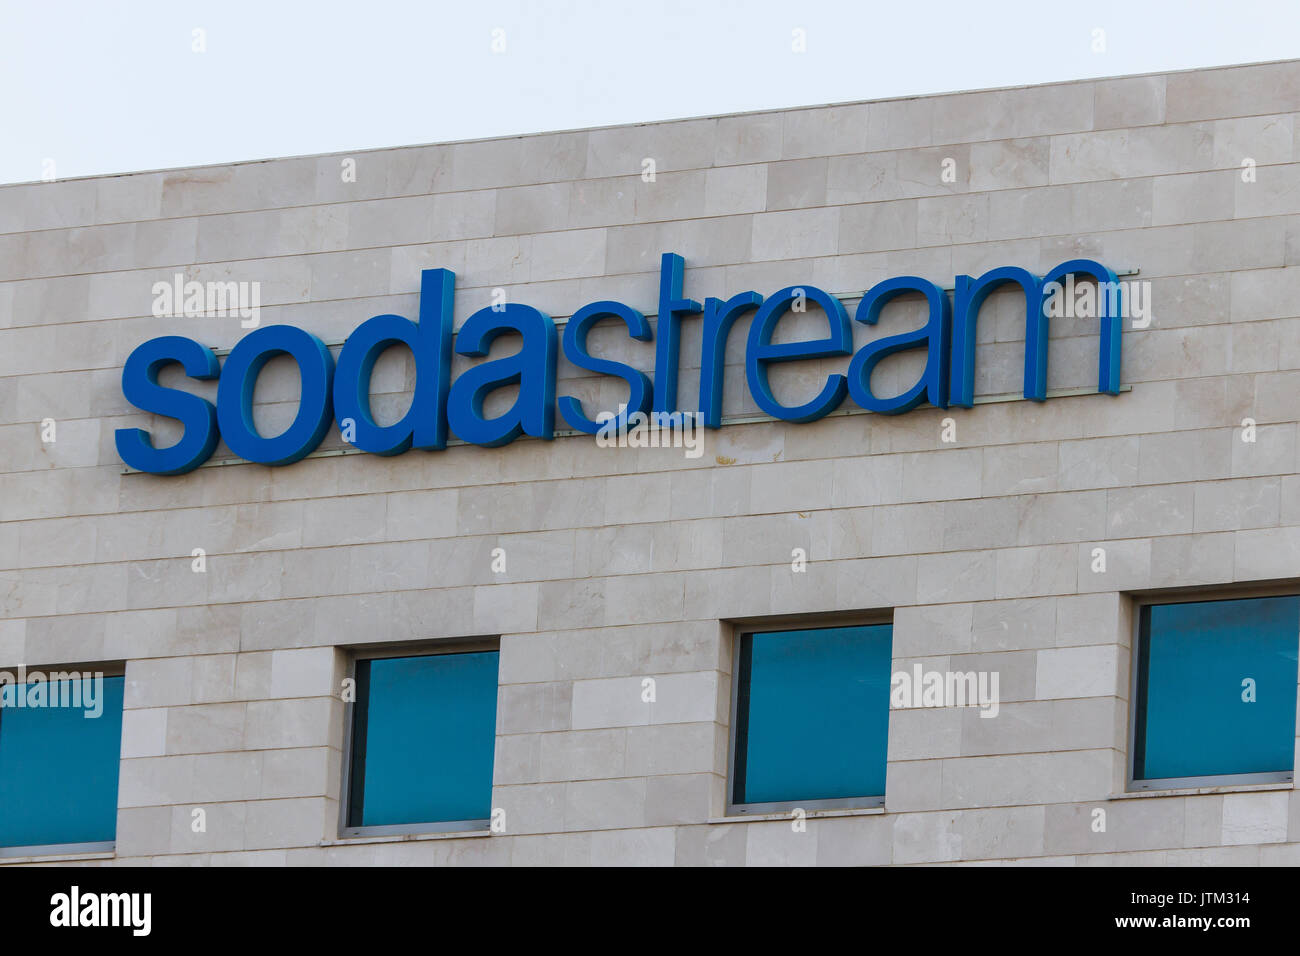 April 7, 2017 Sodastream Corporate Offices, Airport City, Israel. Sodastream is a maker of consumer home carbonation products. Stock Photo